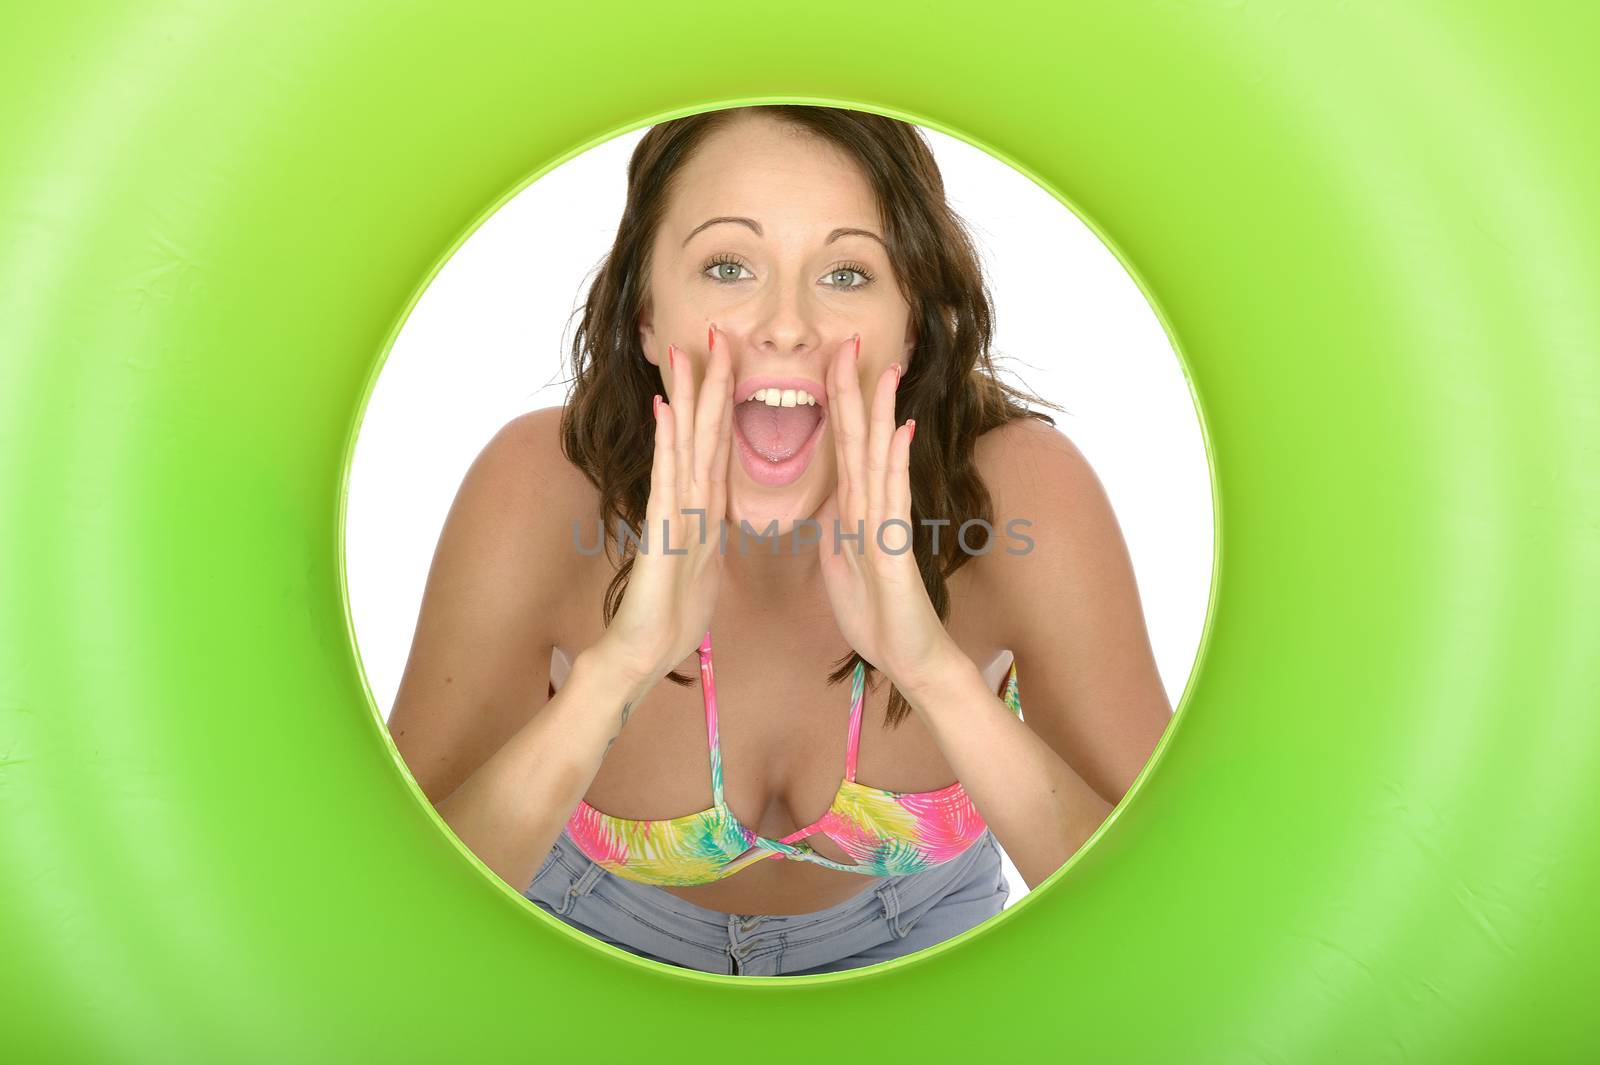 Attractive Young Woman Looking Through a Green Rubber Ring Shouting